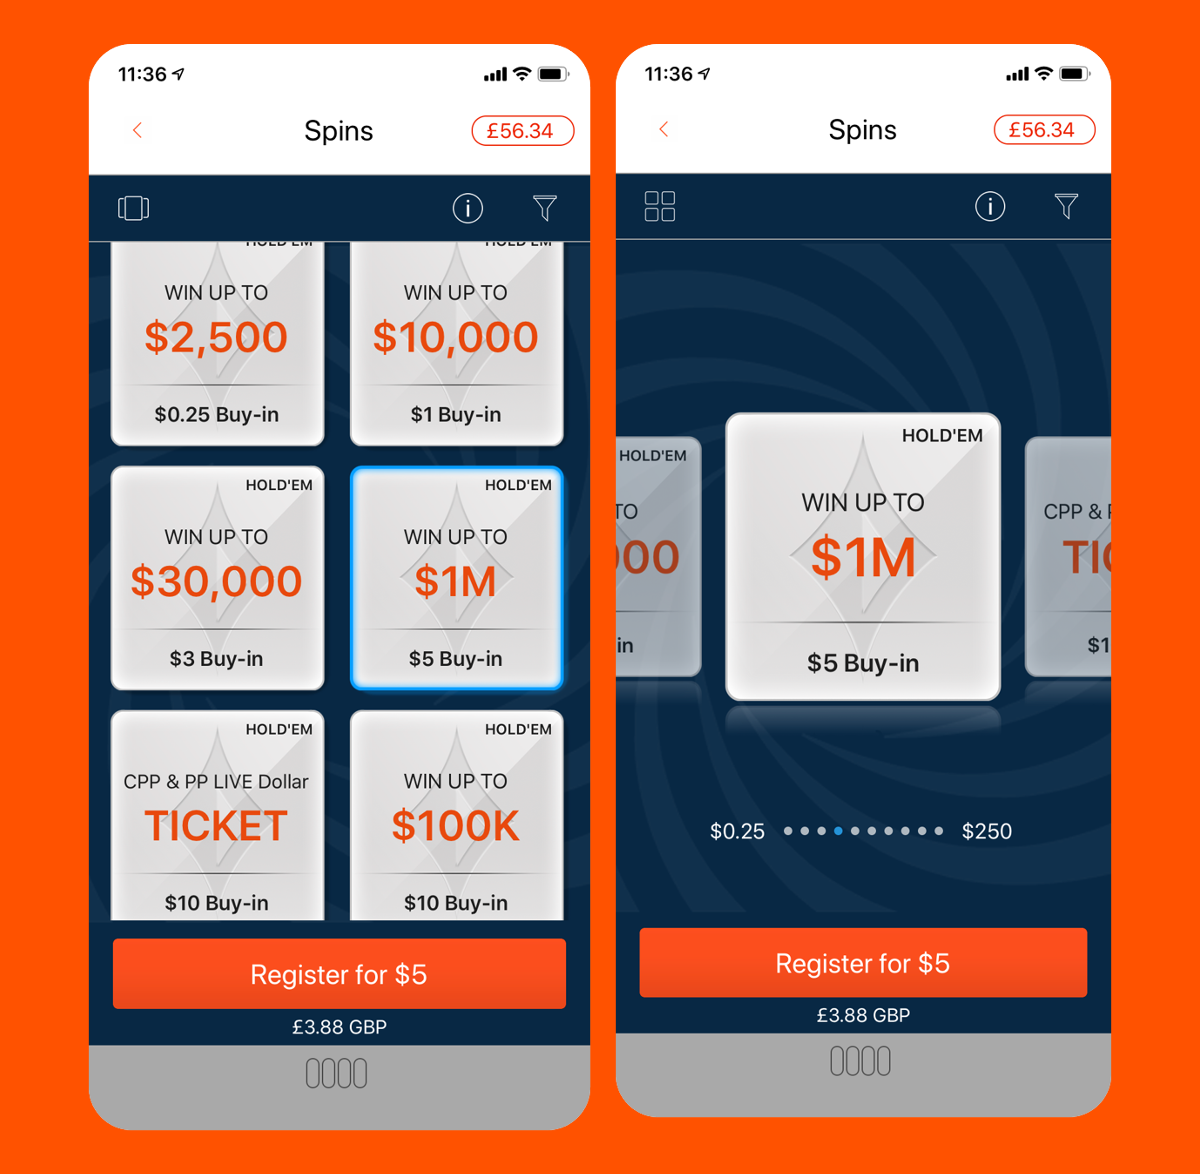 Partypoker's New Mobile App First Look: The New Lobby